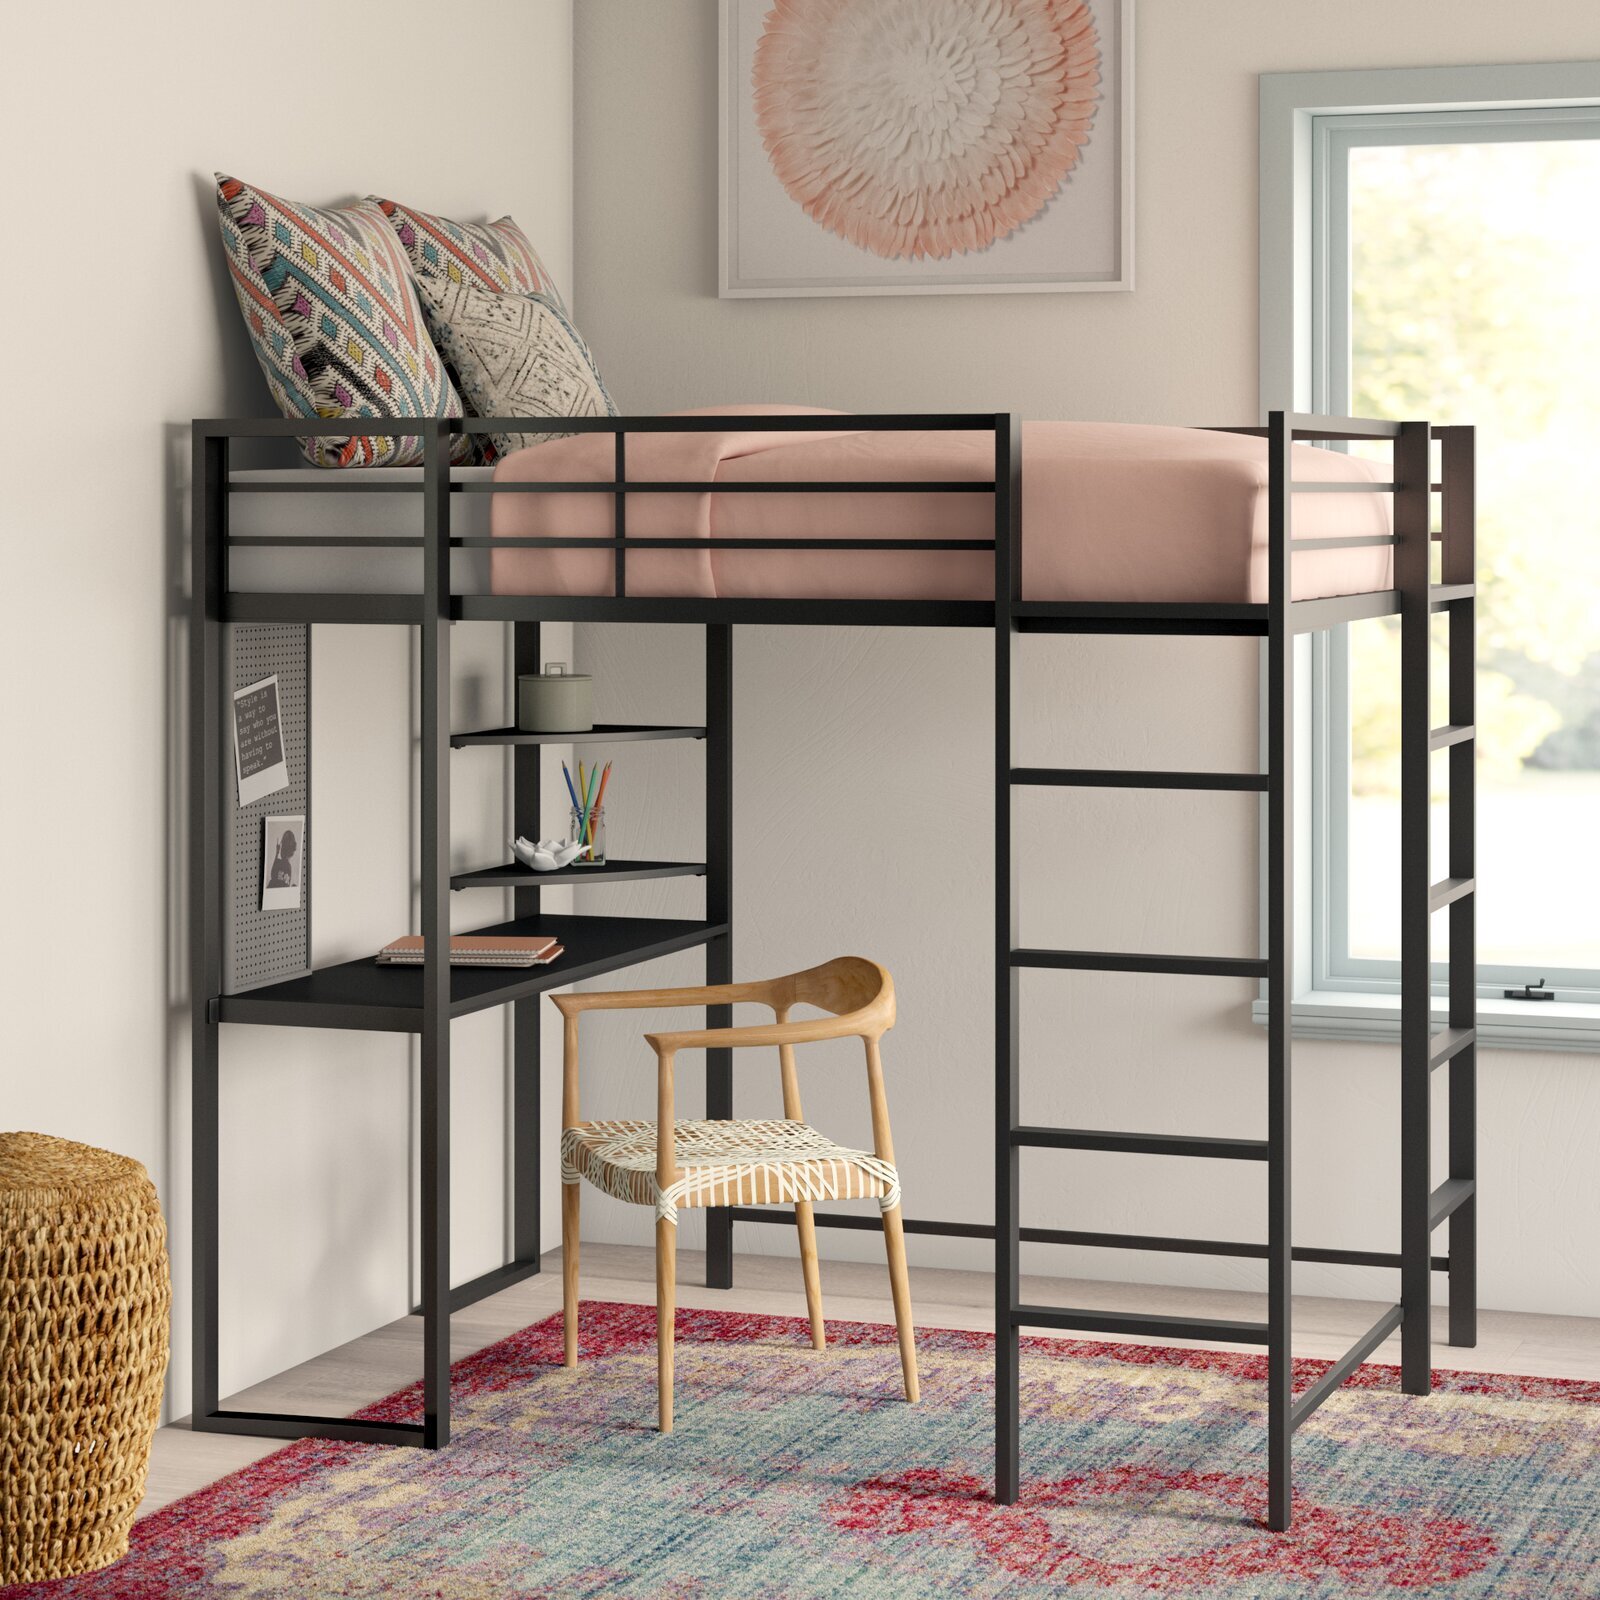 Adult Bunk Beds with Desk, Corner Triangle Shelves, and Built in Bulletin Board